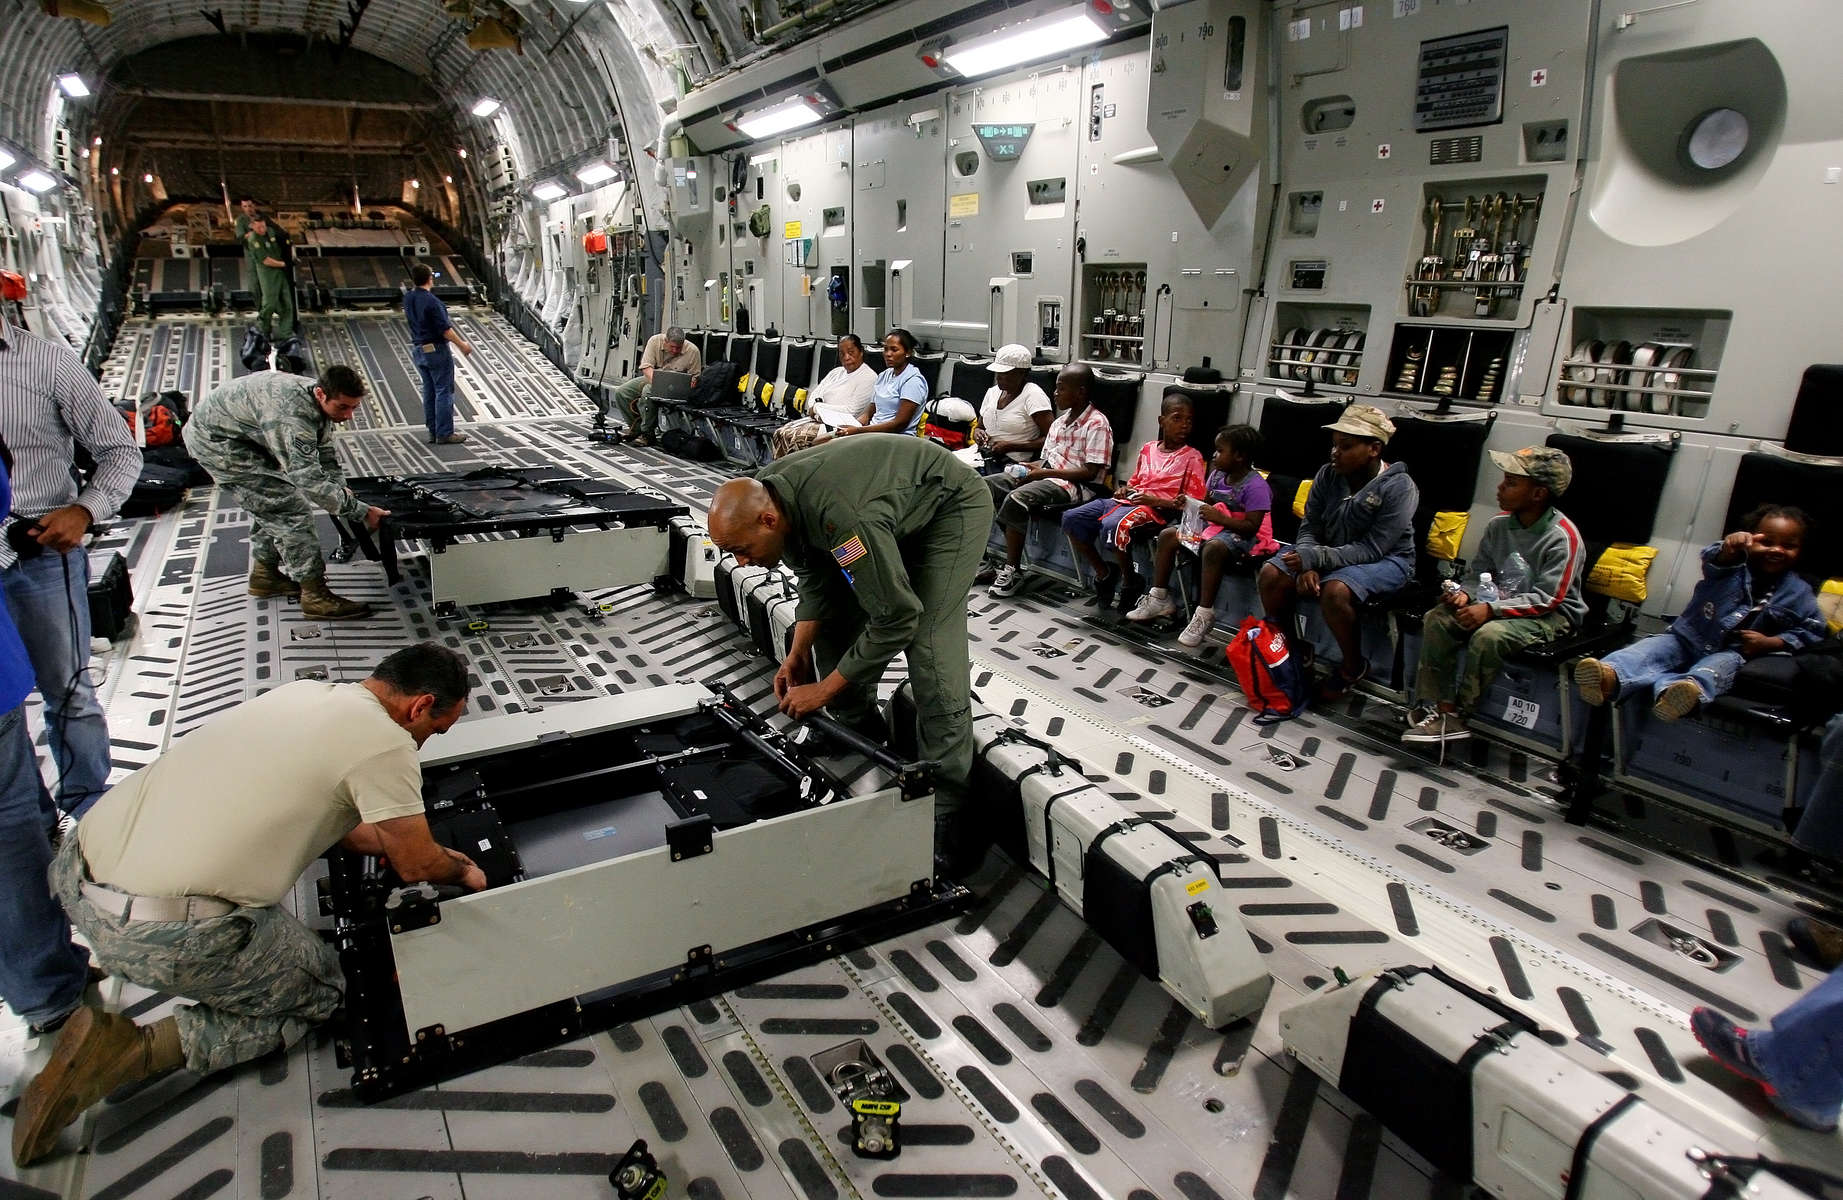 March Air Reserve Base C-17 Master Sgt. Lee Markos, left, and Commander Major Averie Payton put together more seating in the cargo bay of the plane to accommodate seating for 52 children from a orphanage in Port-Au-Prince, Haiti. The children are being evacuated to Orlando, Fla., to meet the families who adopting them. (The Press-Enterprise/ Mark Zaleski)